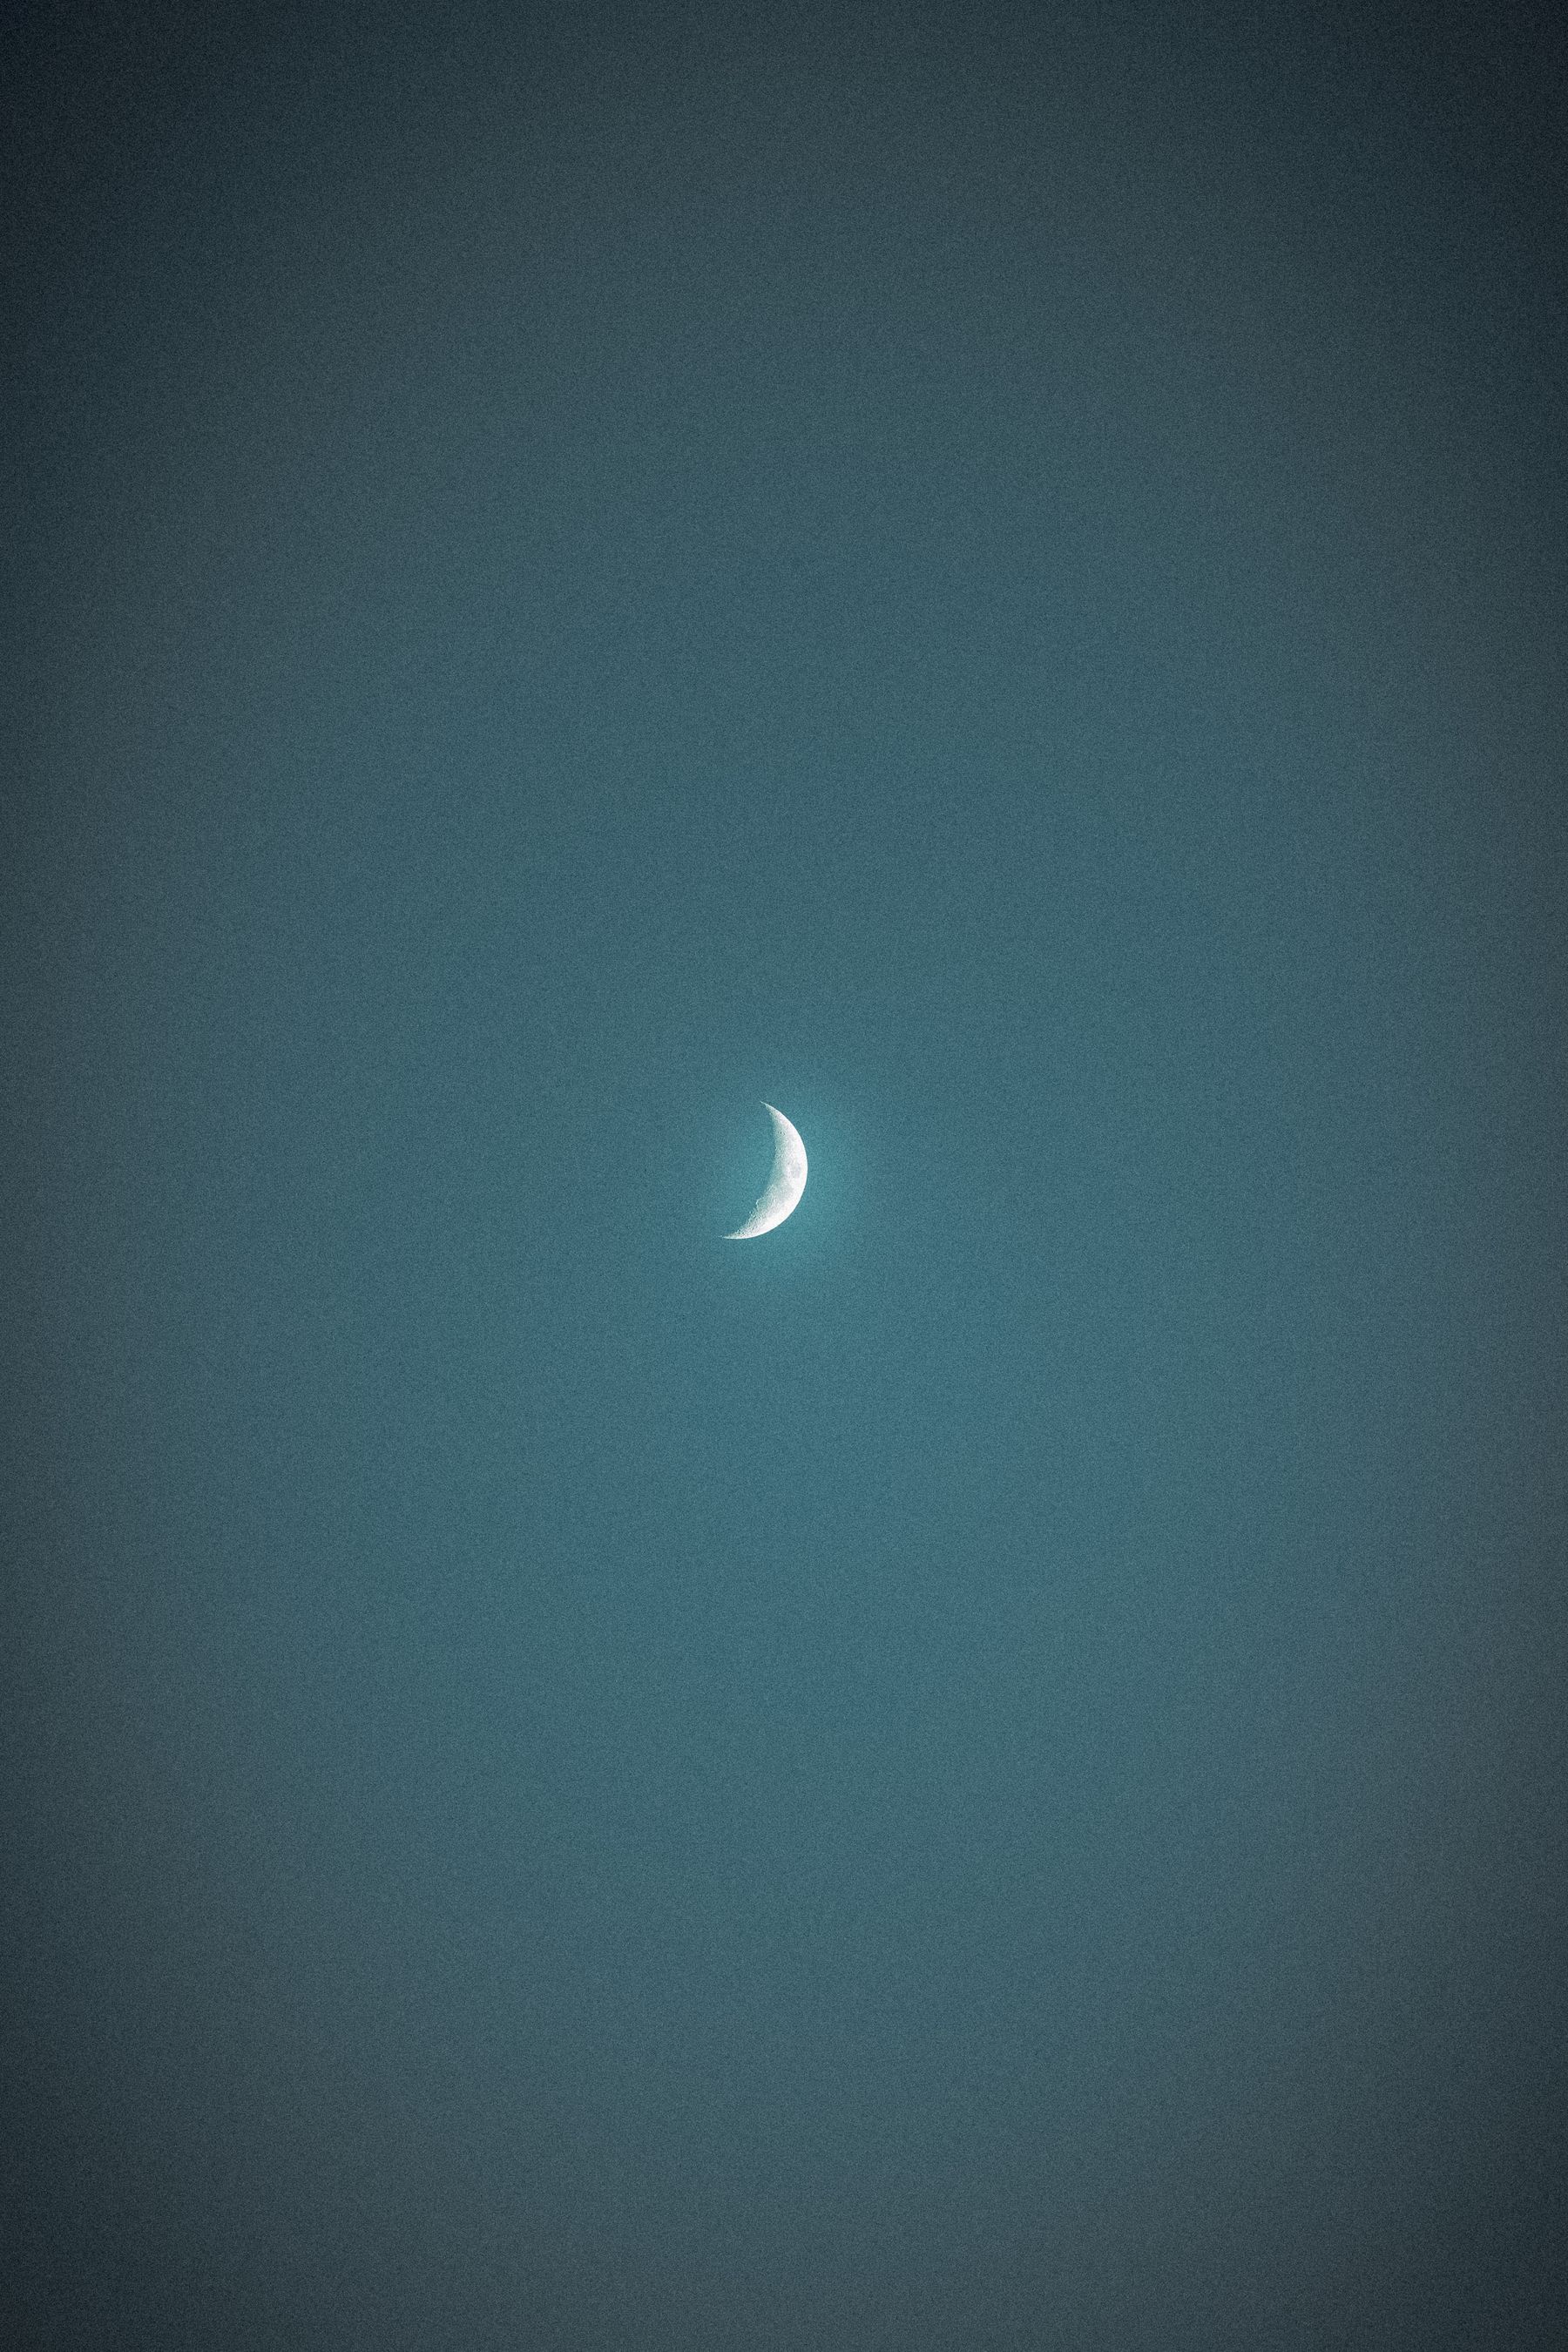 The image captures a waxing crescent moon centered in a dark, textured night sky. The moon is brightly lit on its curved edge, fading into darkness toward the rest of its surface, which is barely visible against the backdrop of the evening glow.